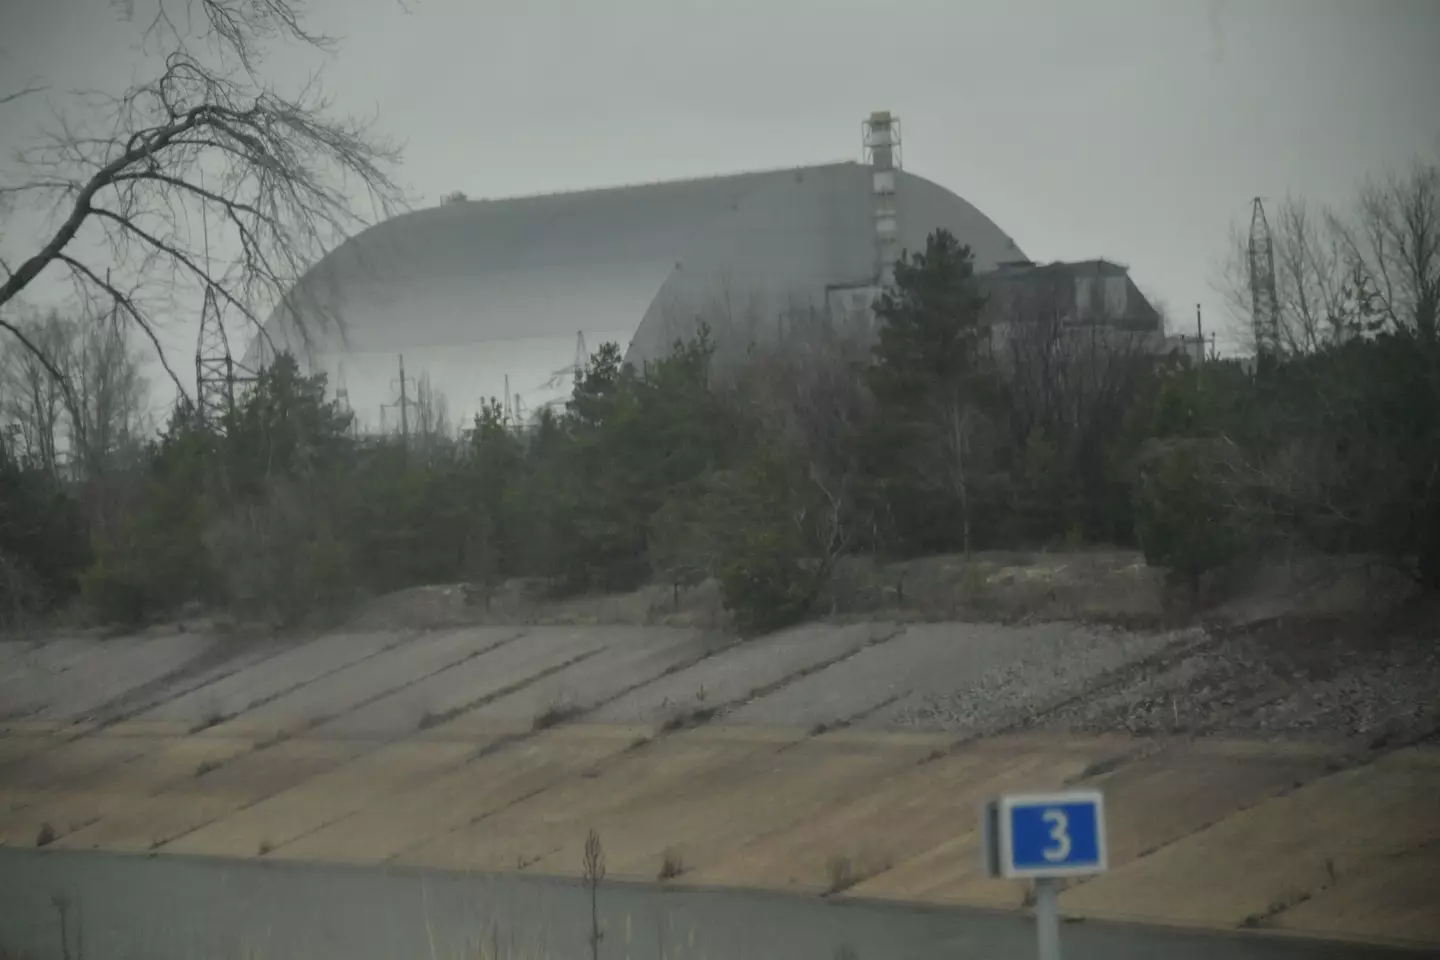 Chernobyl's covered fourth reactor.